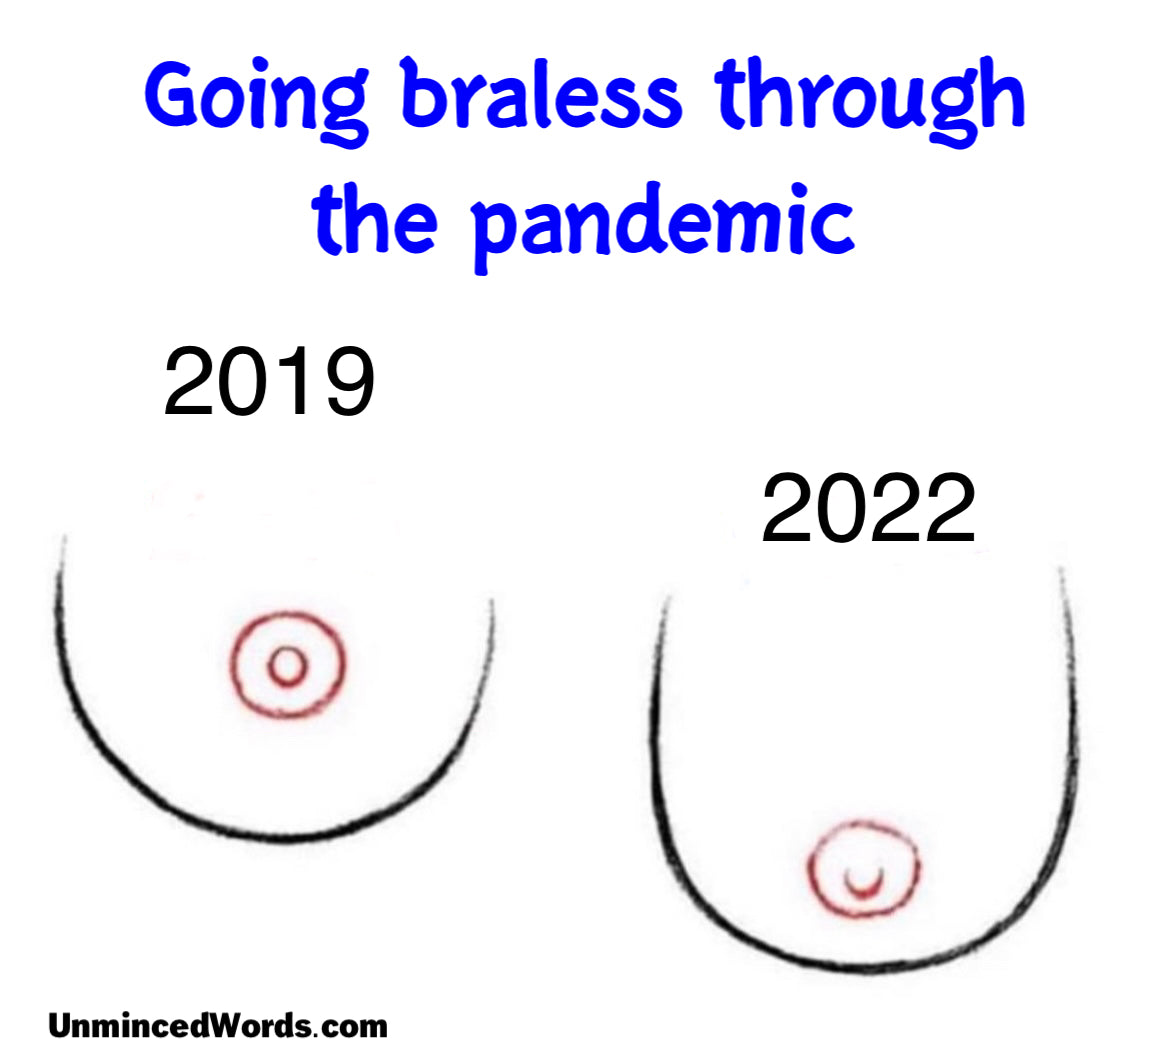 Going braless through the pandemic